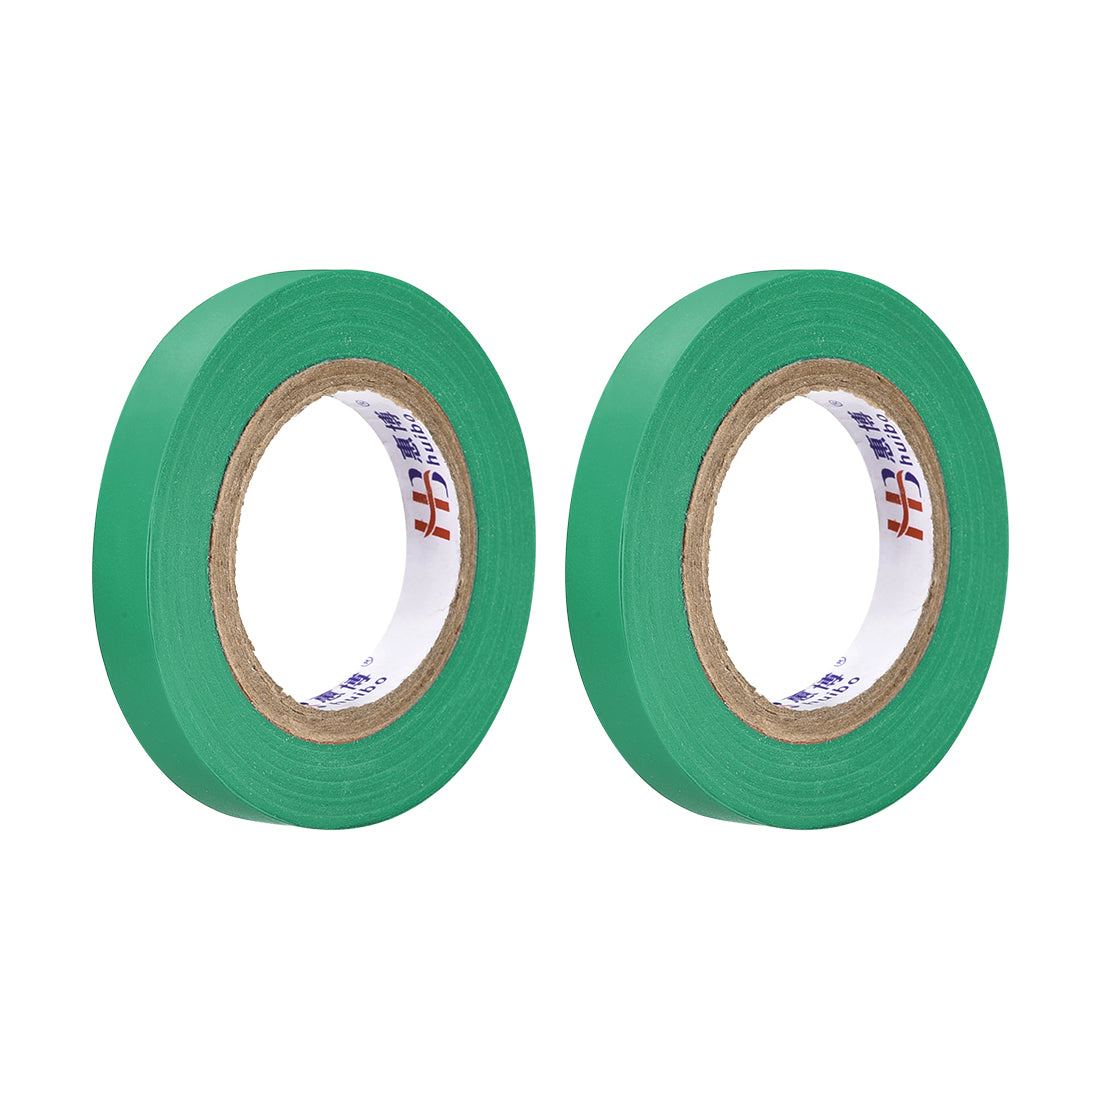 uxcell Uxcell Insulating Tape 10mm Width 14.5M Long 0.15mm Thick PVC Electrical Tape Rated for Max. 400V  80C Use Green 2pcs